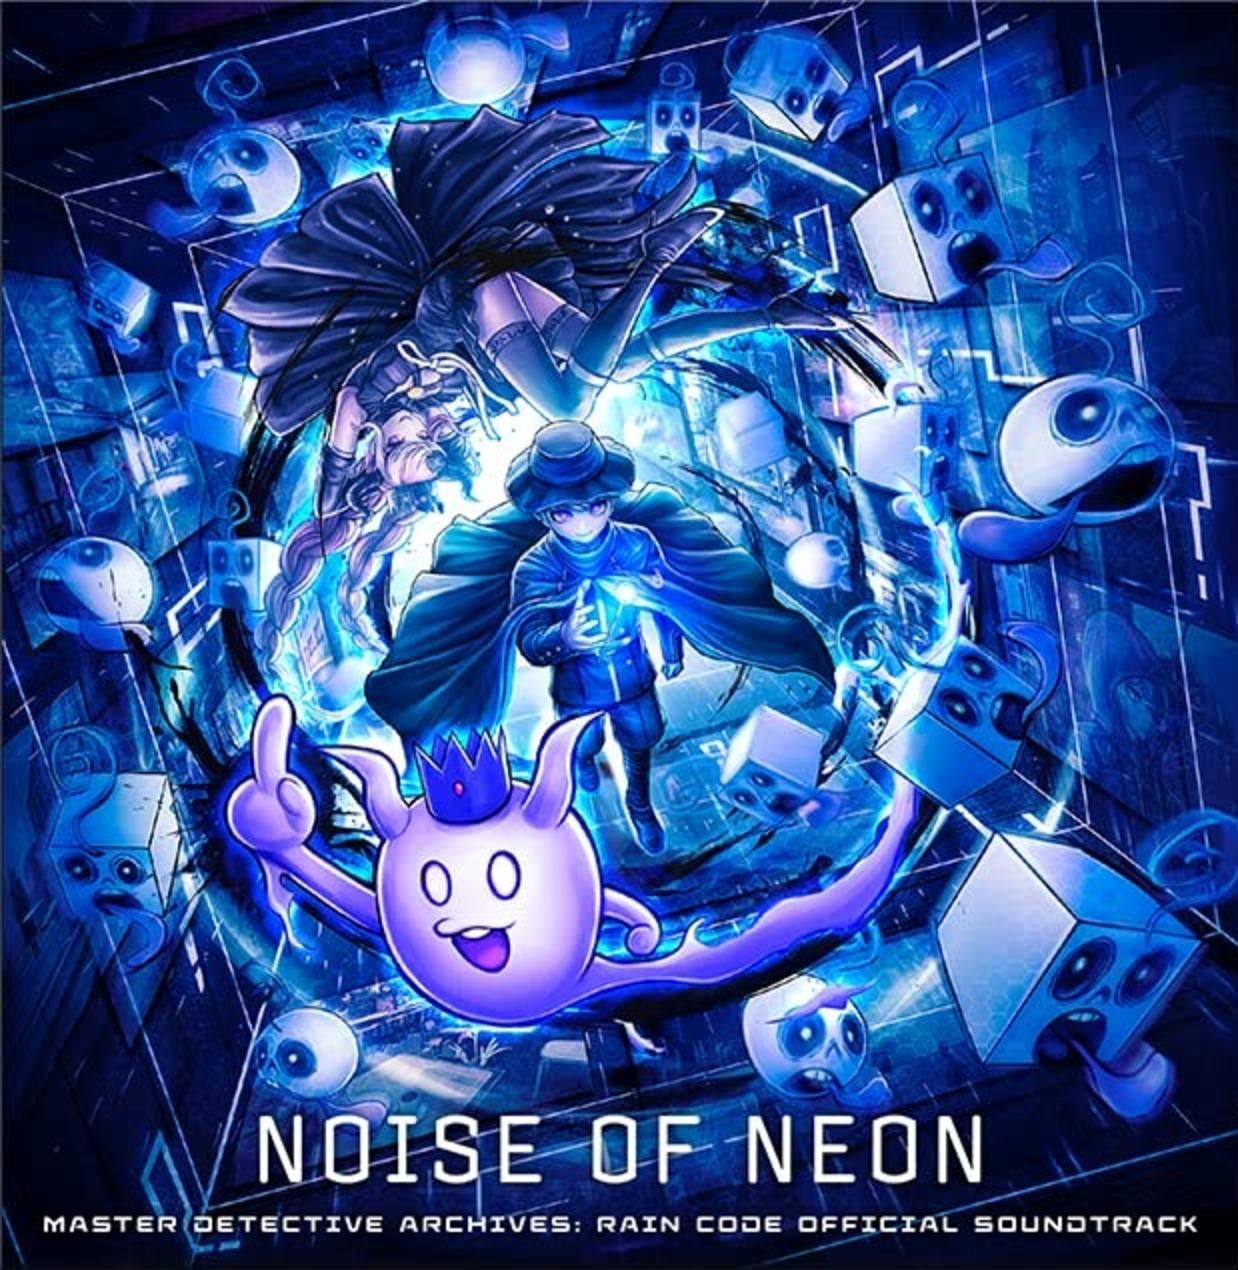 Master Detective Archives: Rain Code Official Soundtrack - Noise of Neon